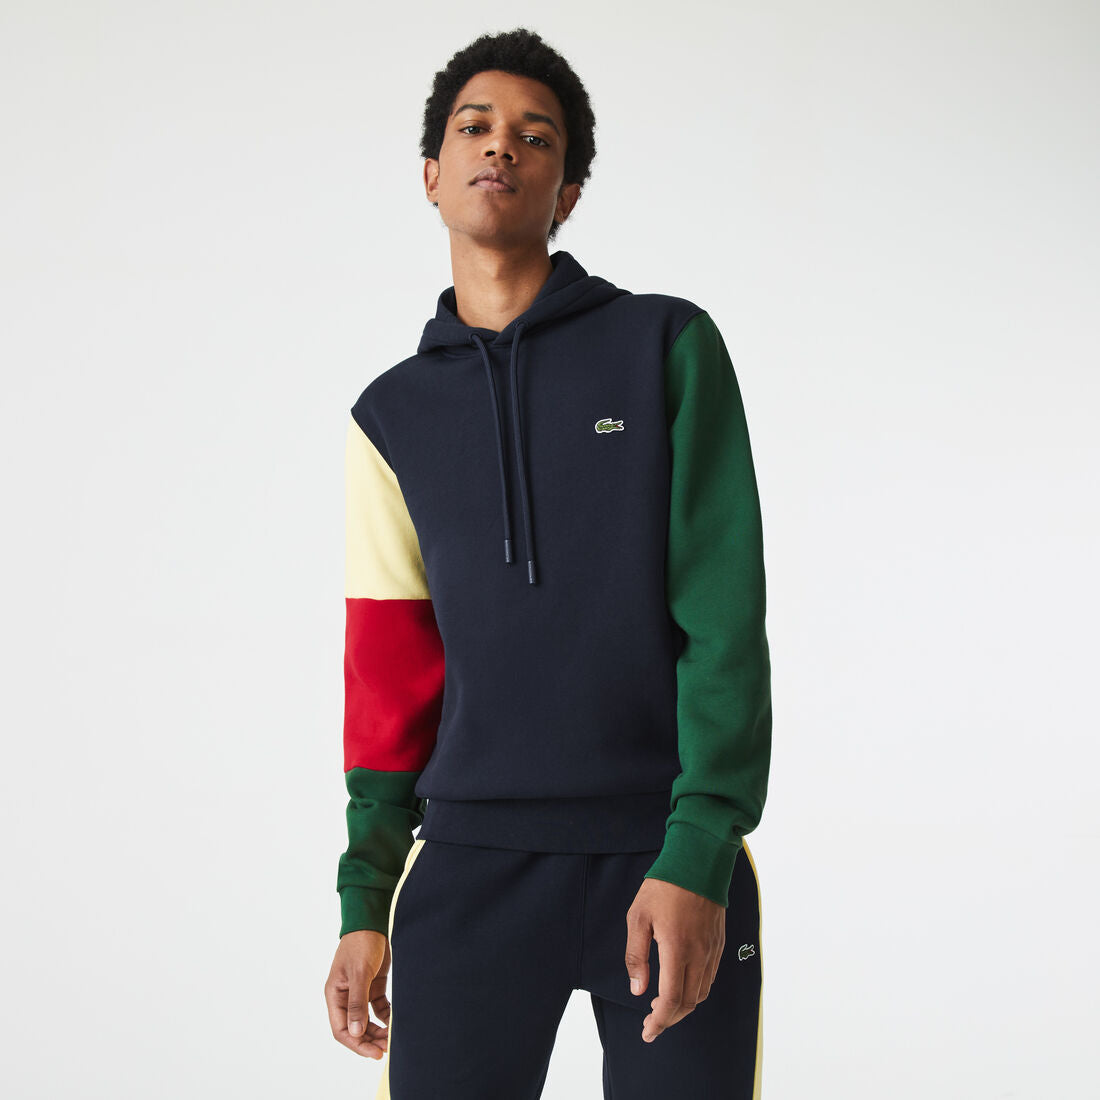 Lacoste - Colour-Block Hooded Sweatshirt - Navy/Green/Red/Yellow